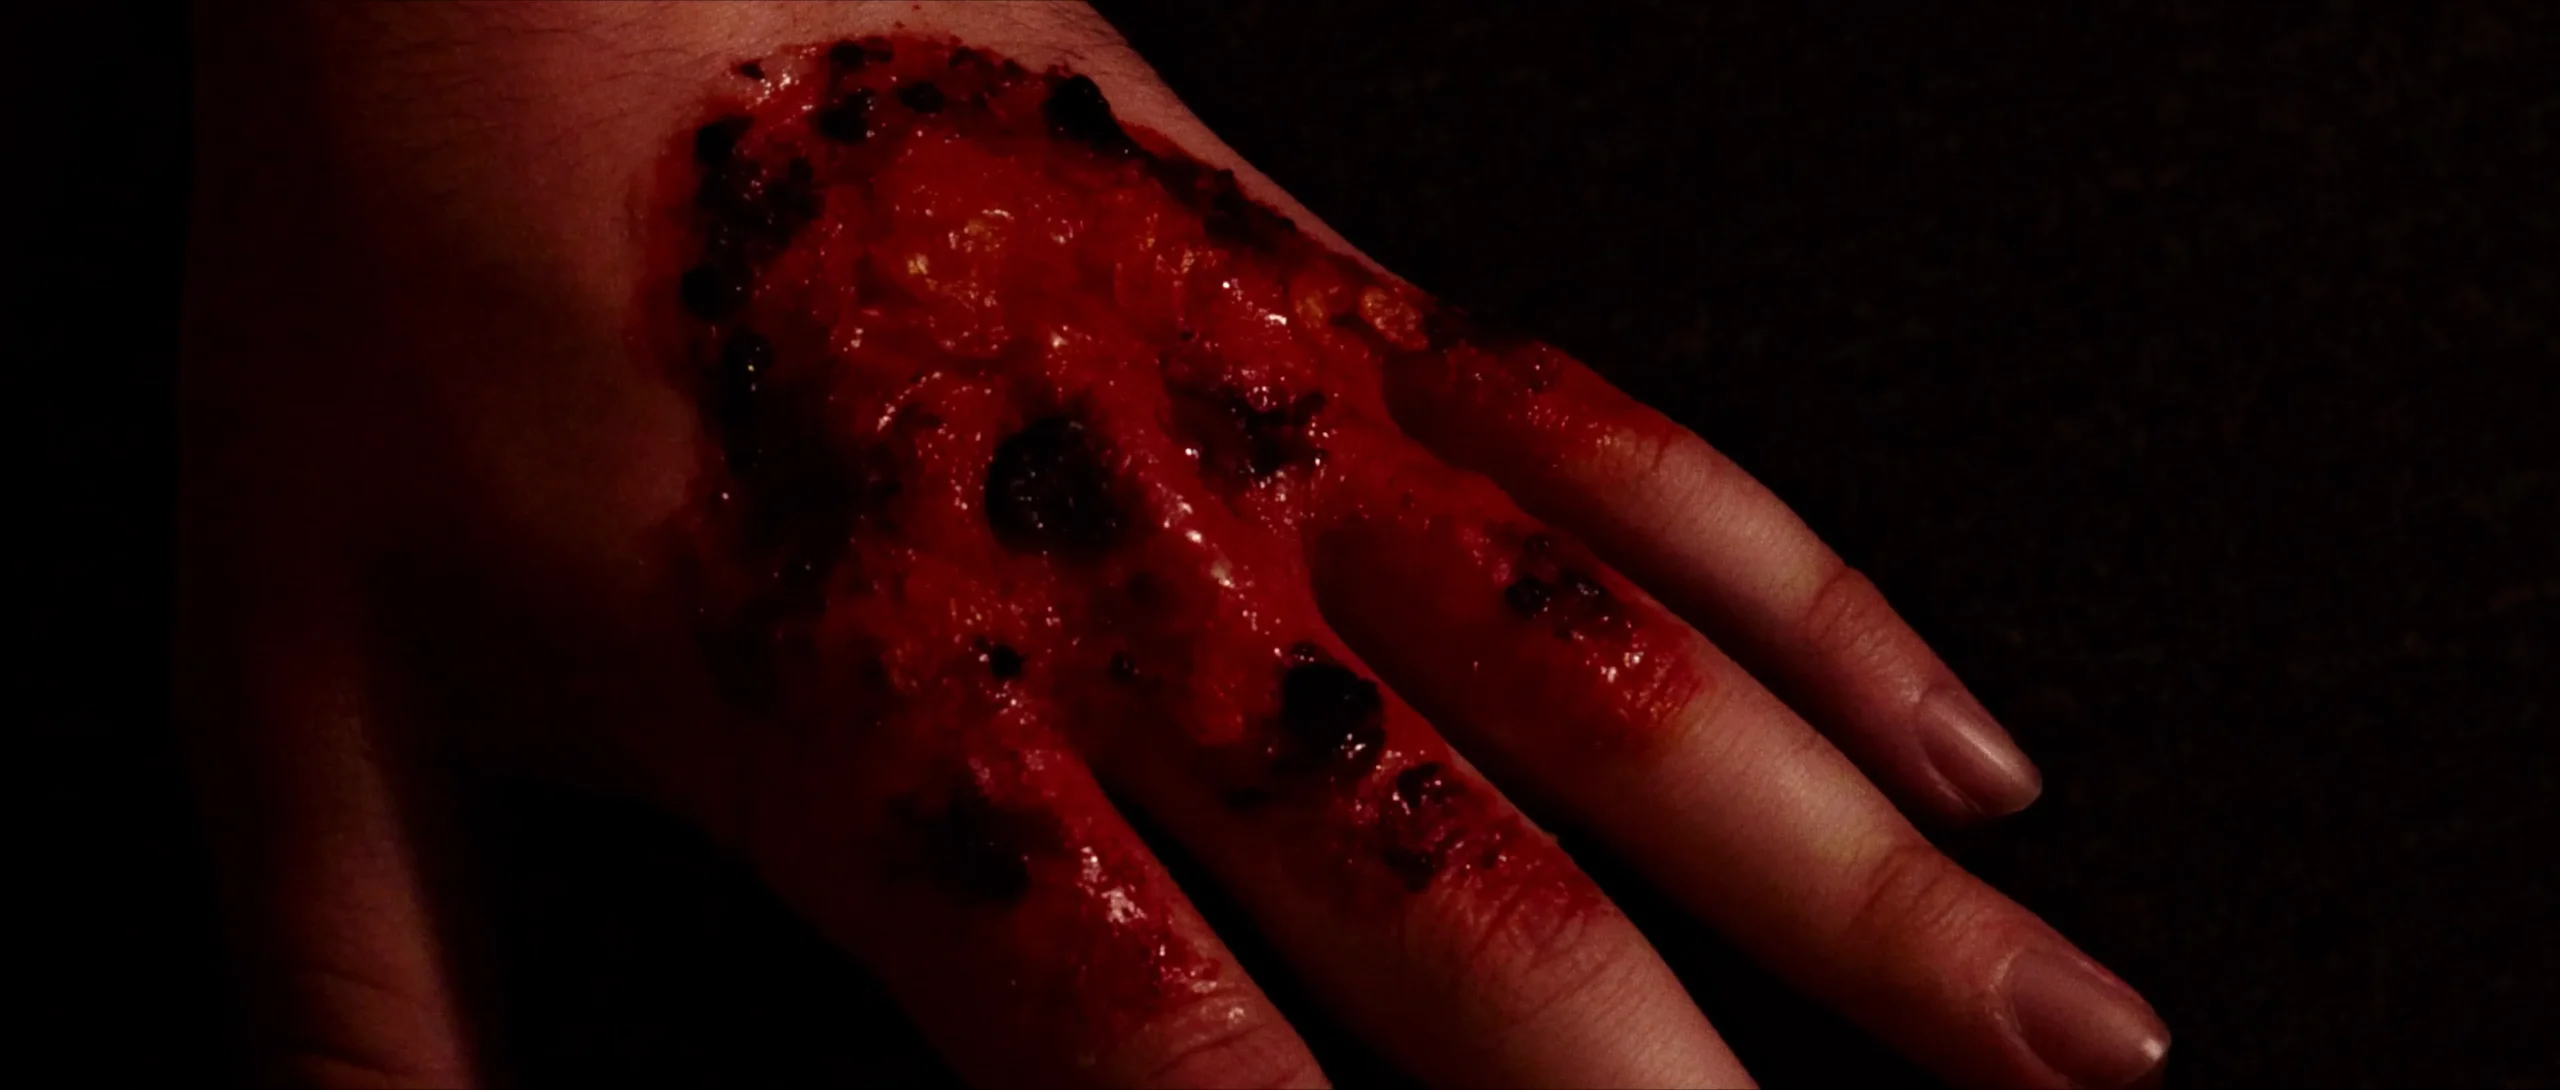 Bloodied hand with visible wounds, in need of medical attention.